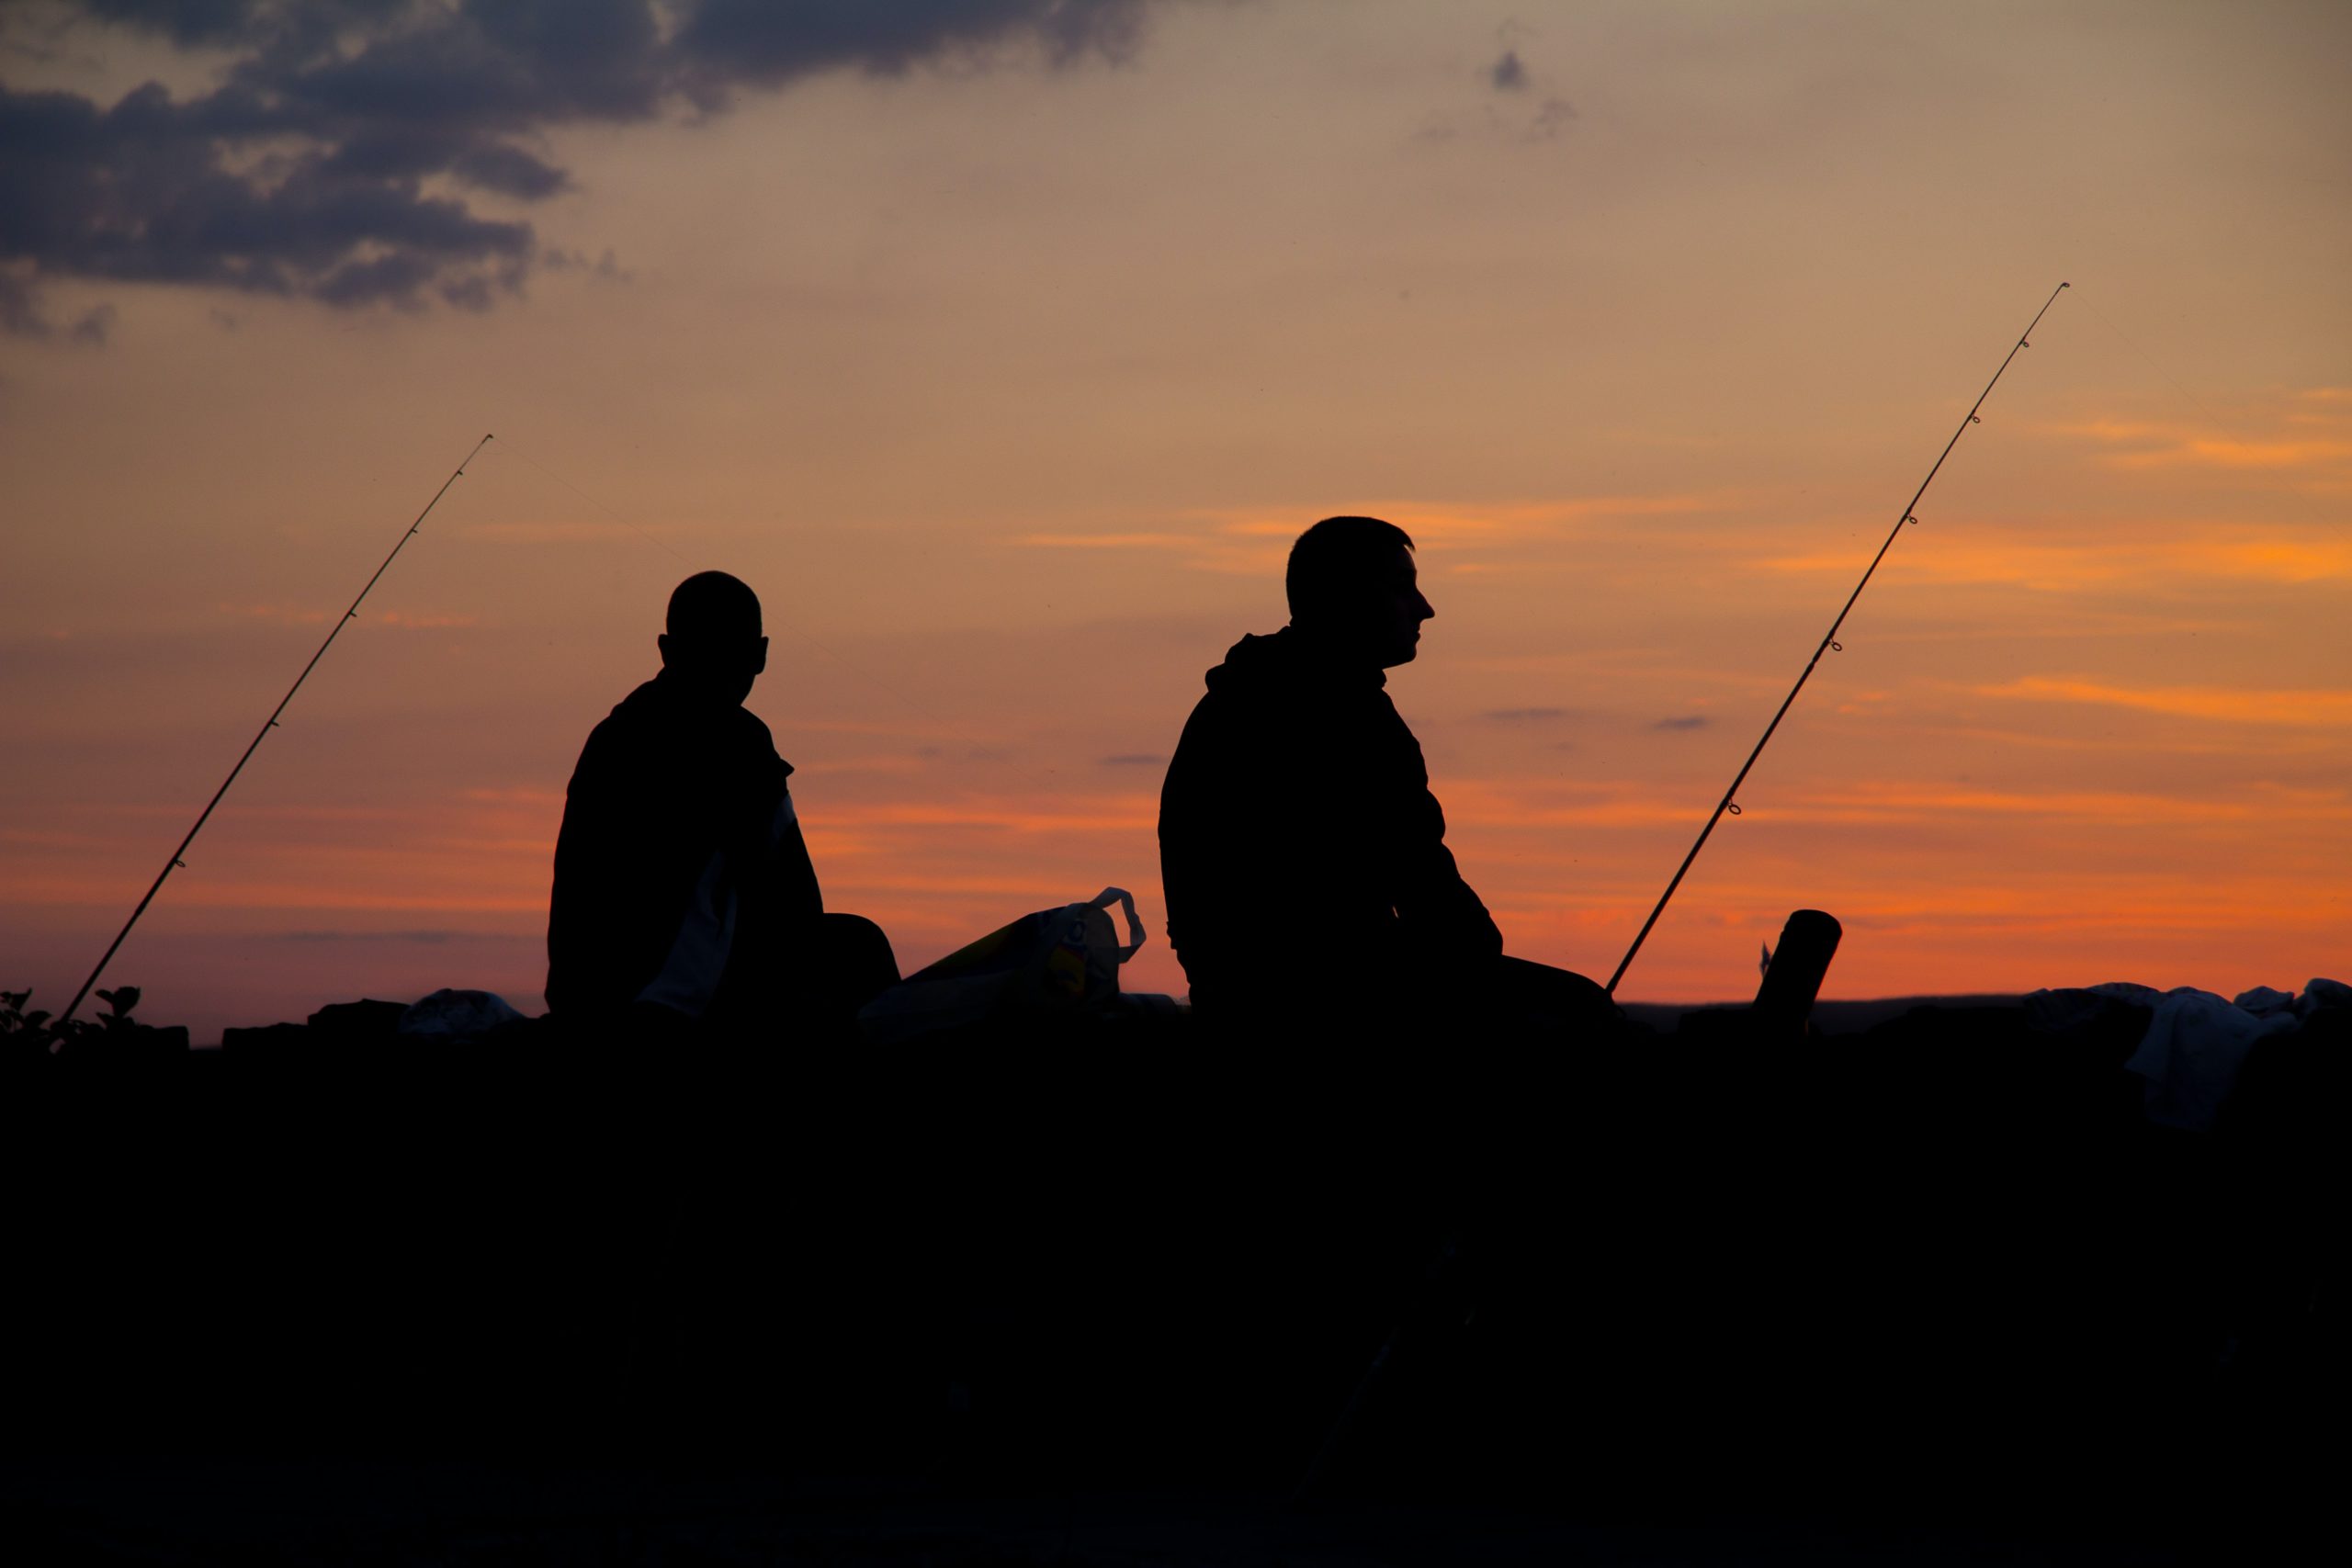 Two fishermen in silhouette at dusk